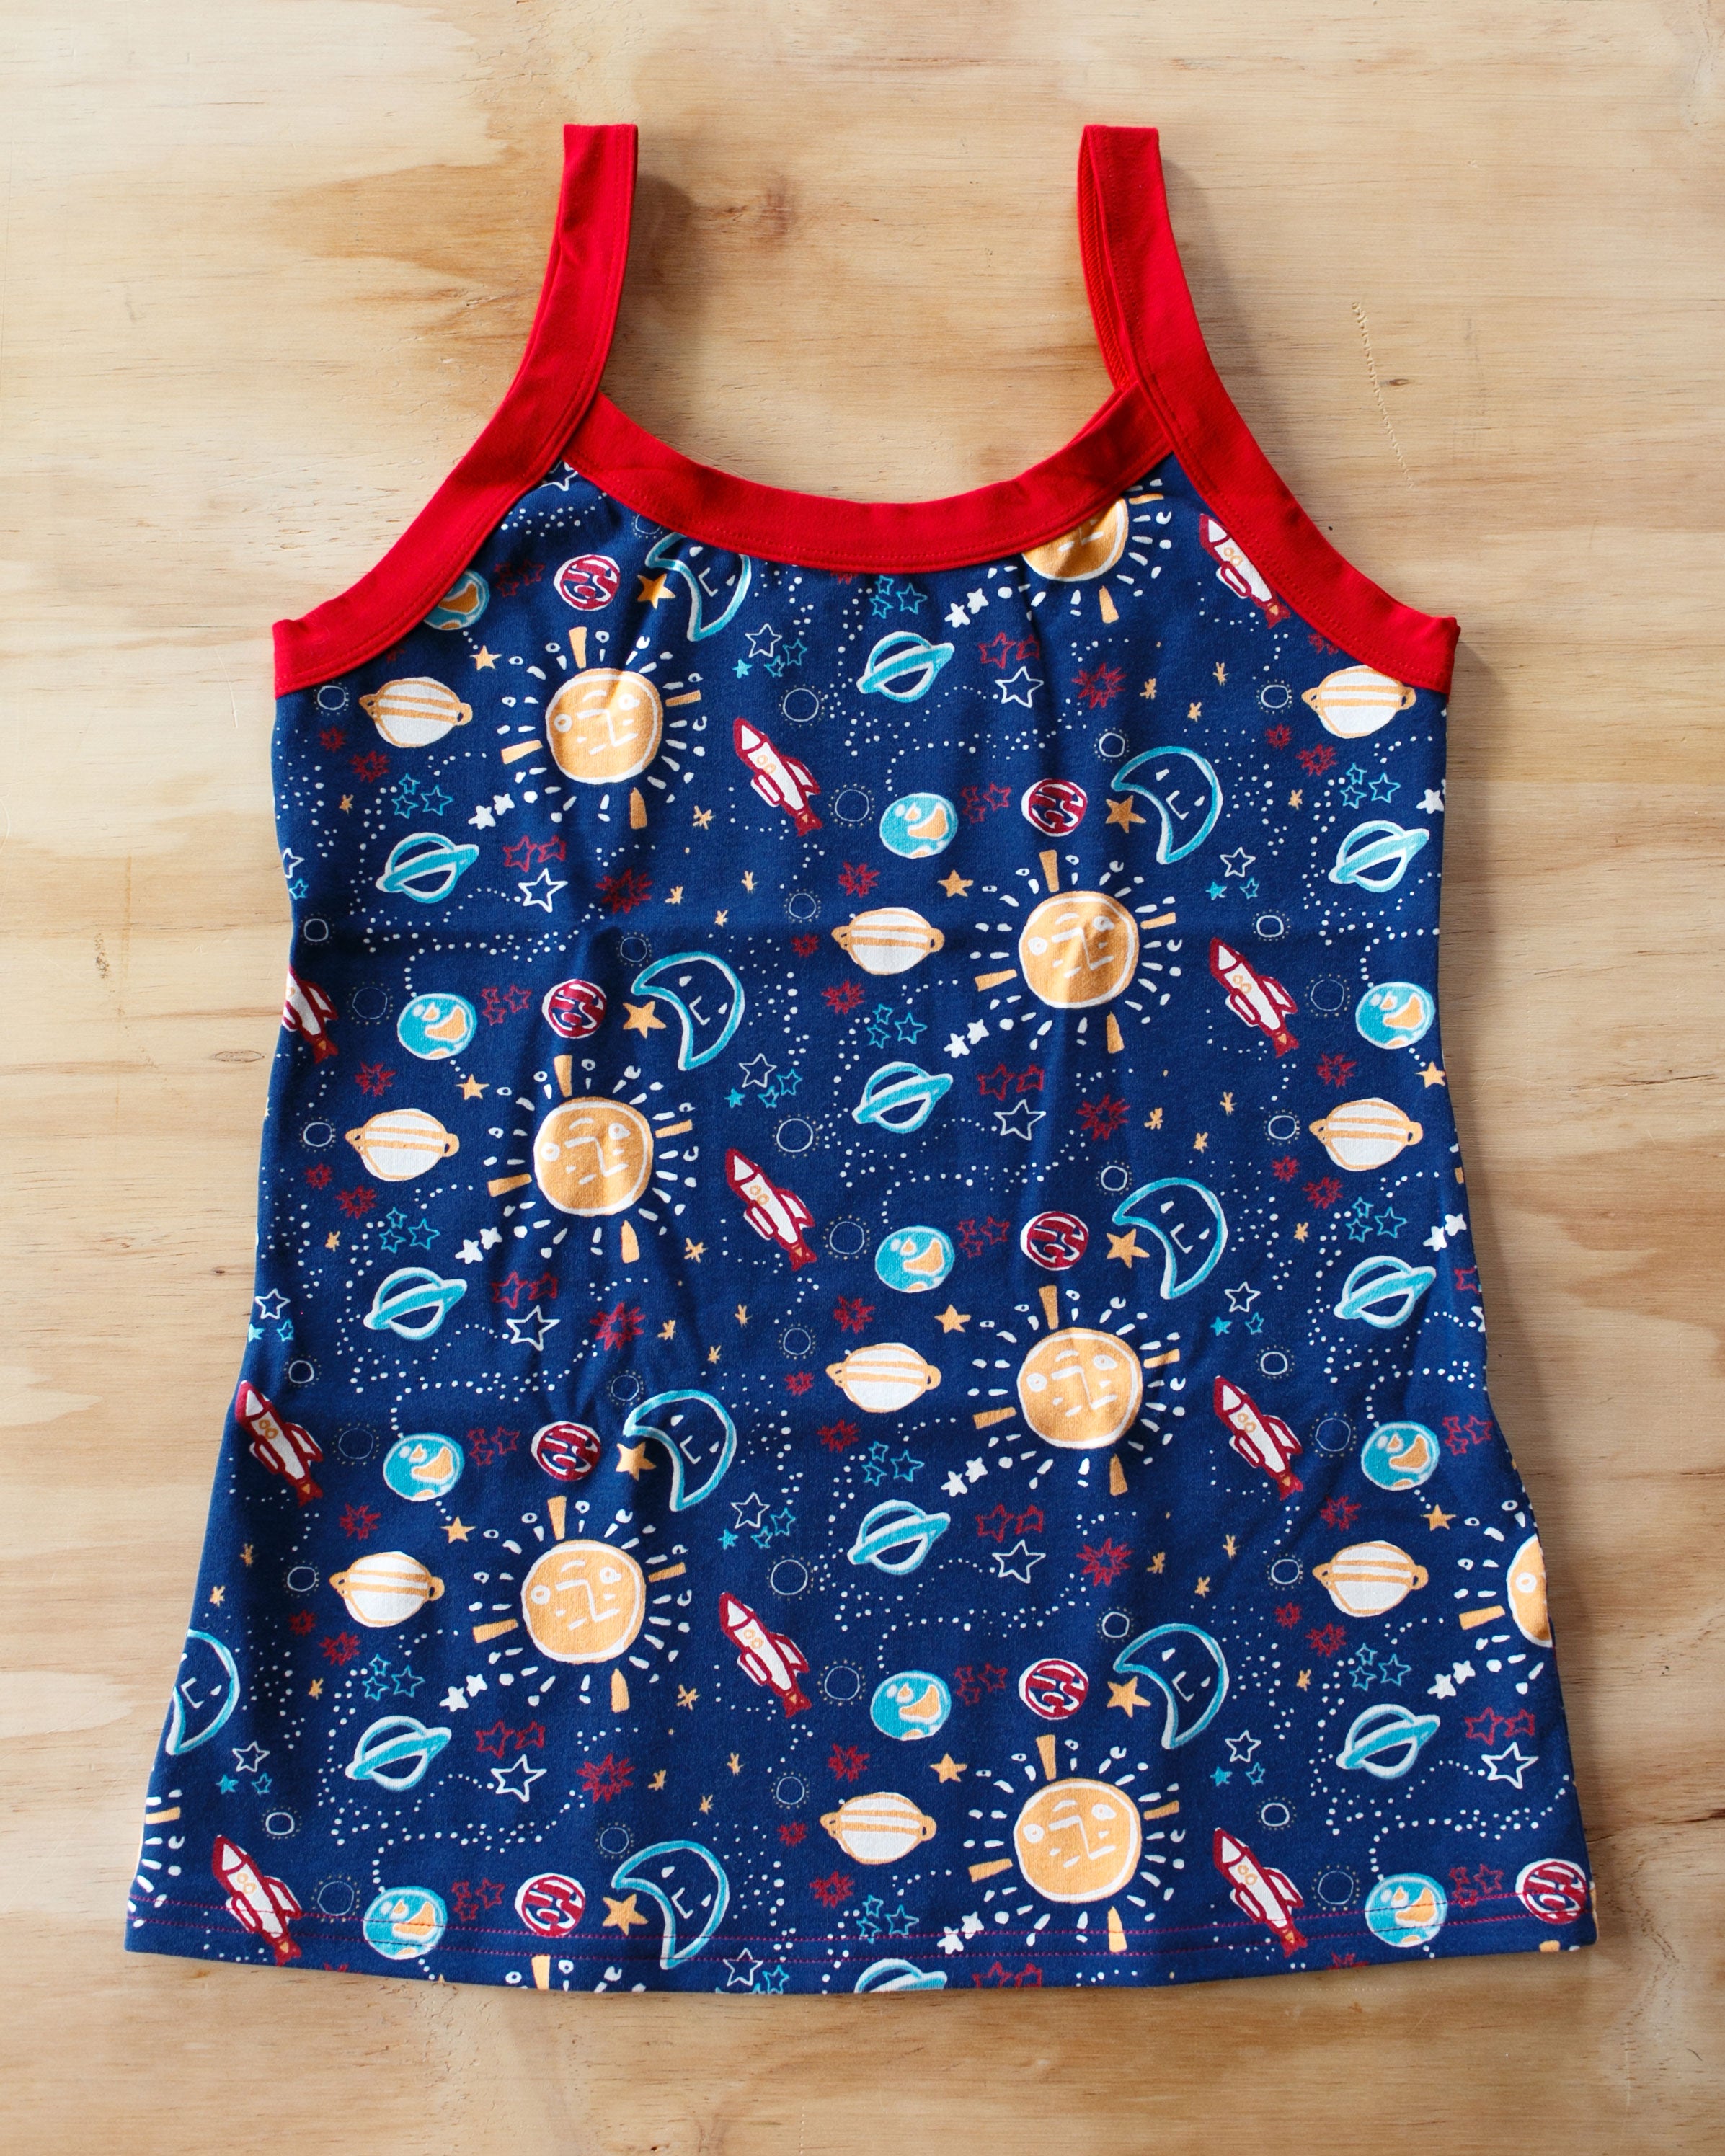 Flat lay of Thunderpants organic cotton Camisole in sun, planets, stars, and universe print with red binding.